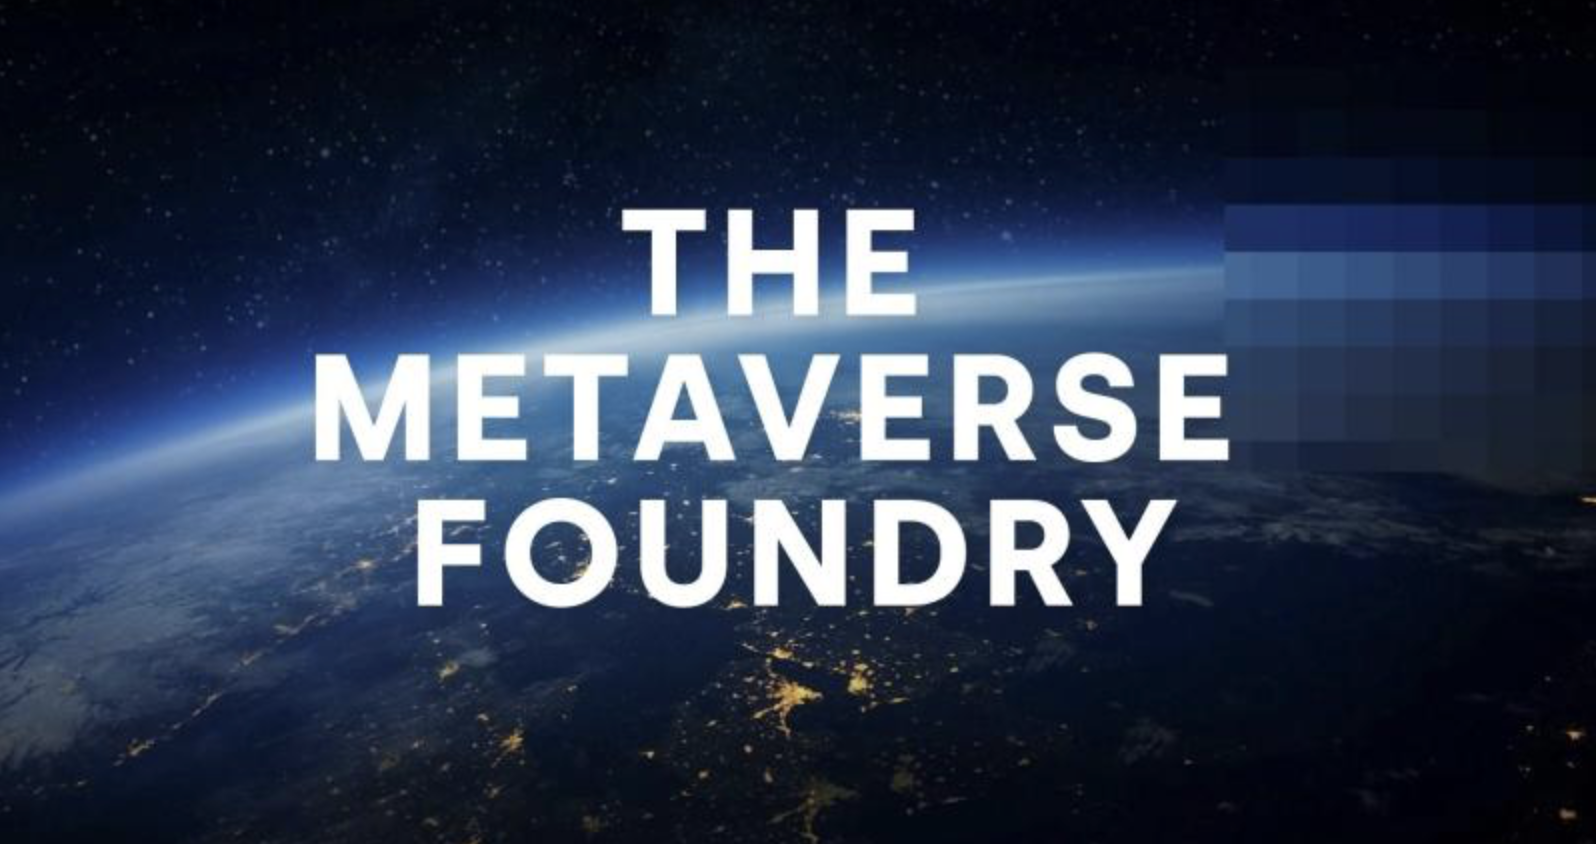 Hogarth launches 700-strong metaverse army